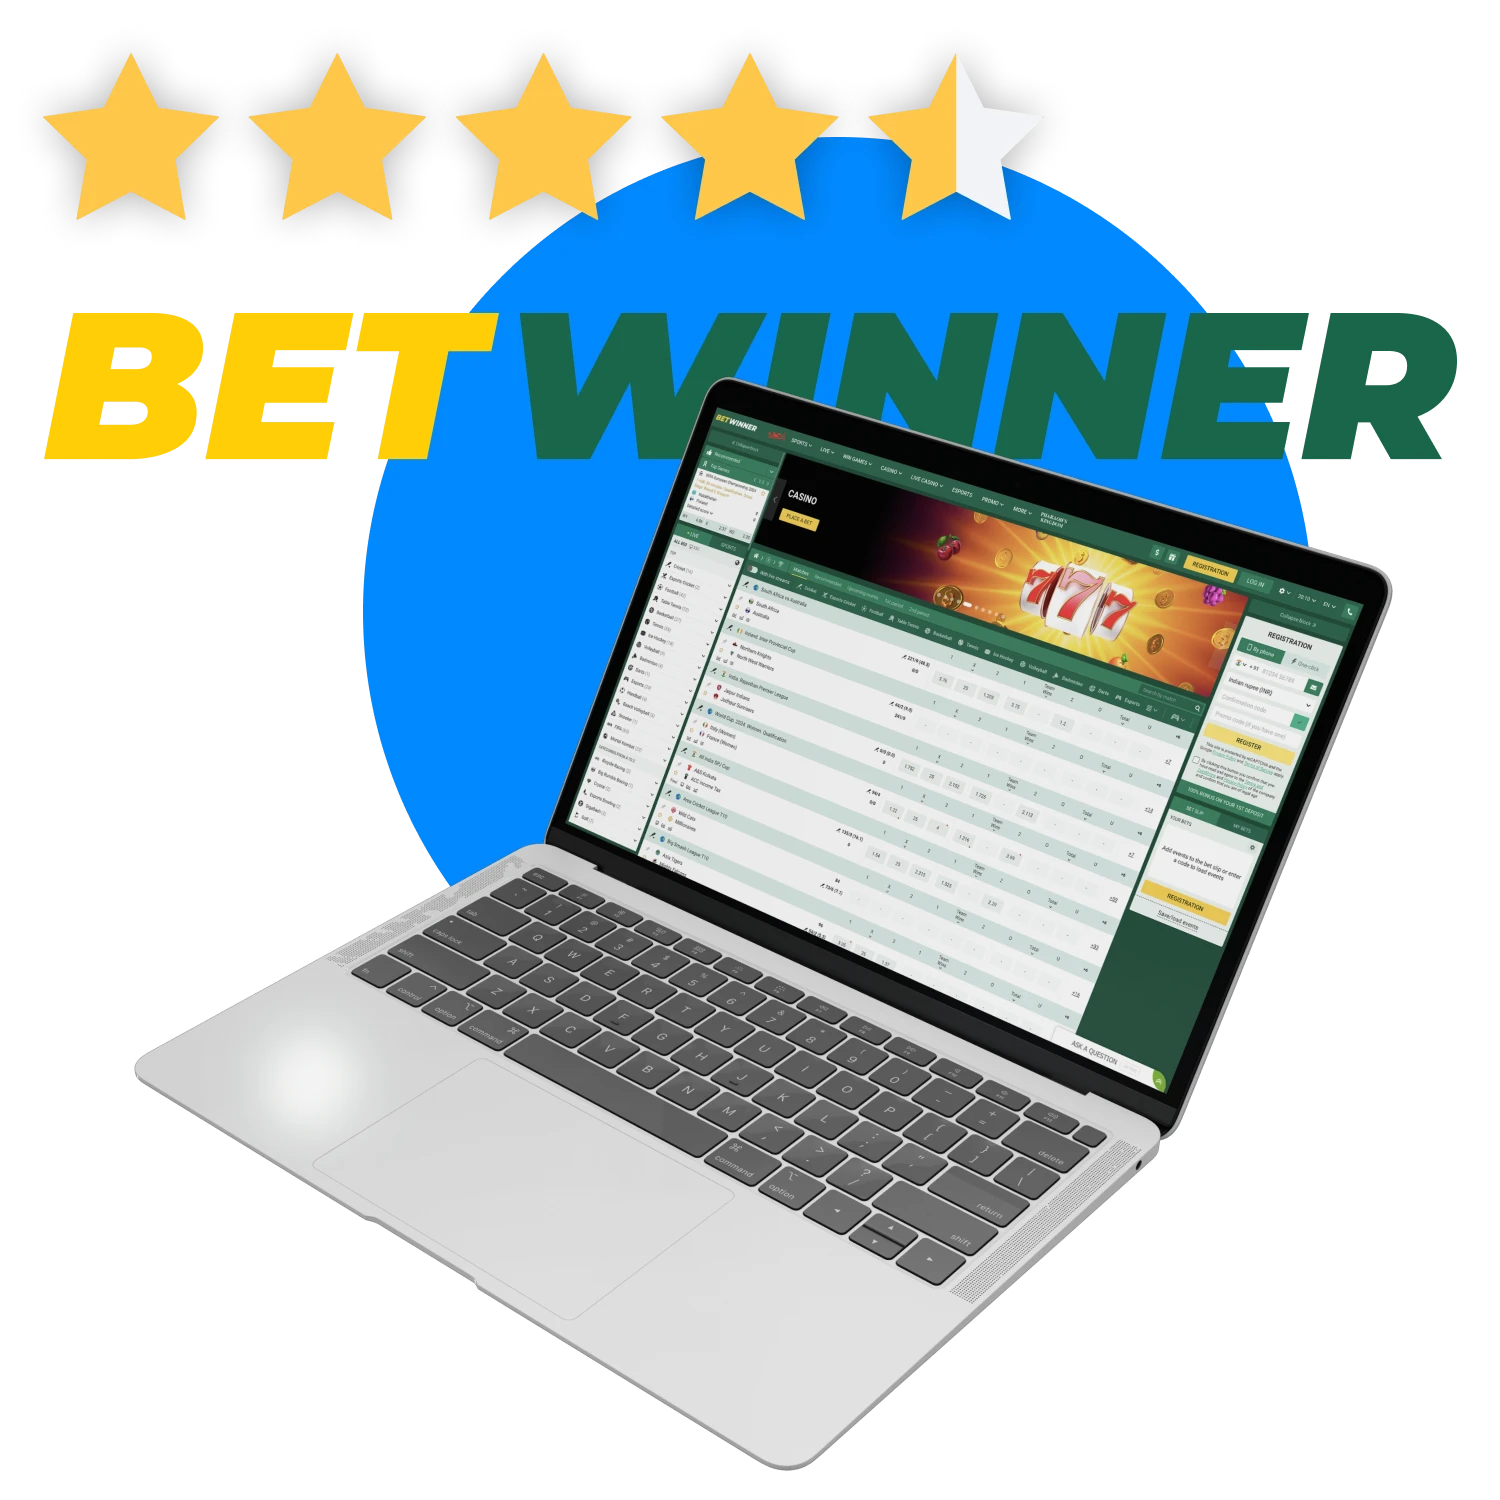 Verified reviews of Betwinner in India.